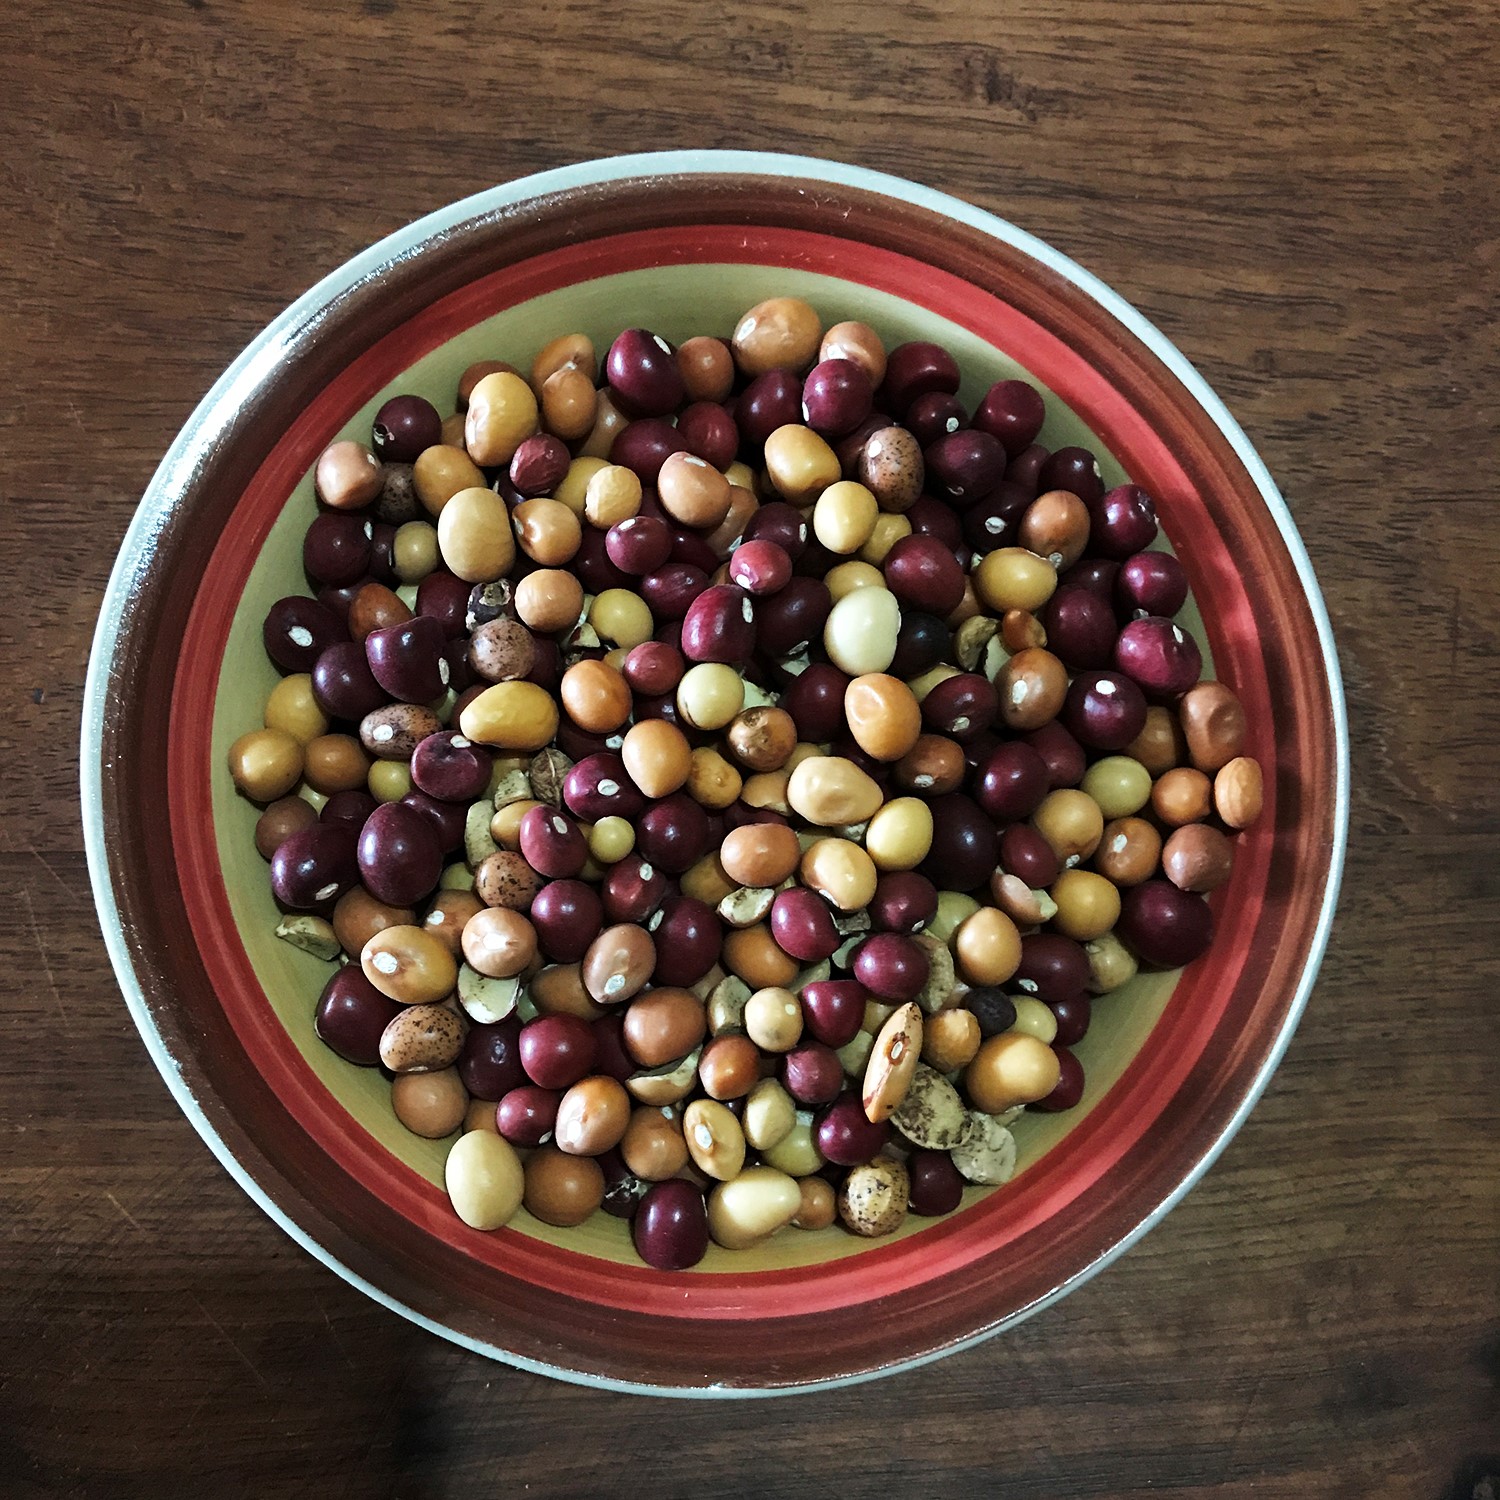 Zyama or Vigna subterranea are considered a complete food because of their high nutritional value.